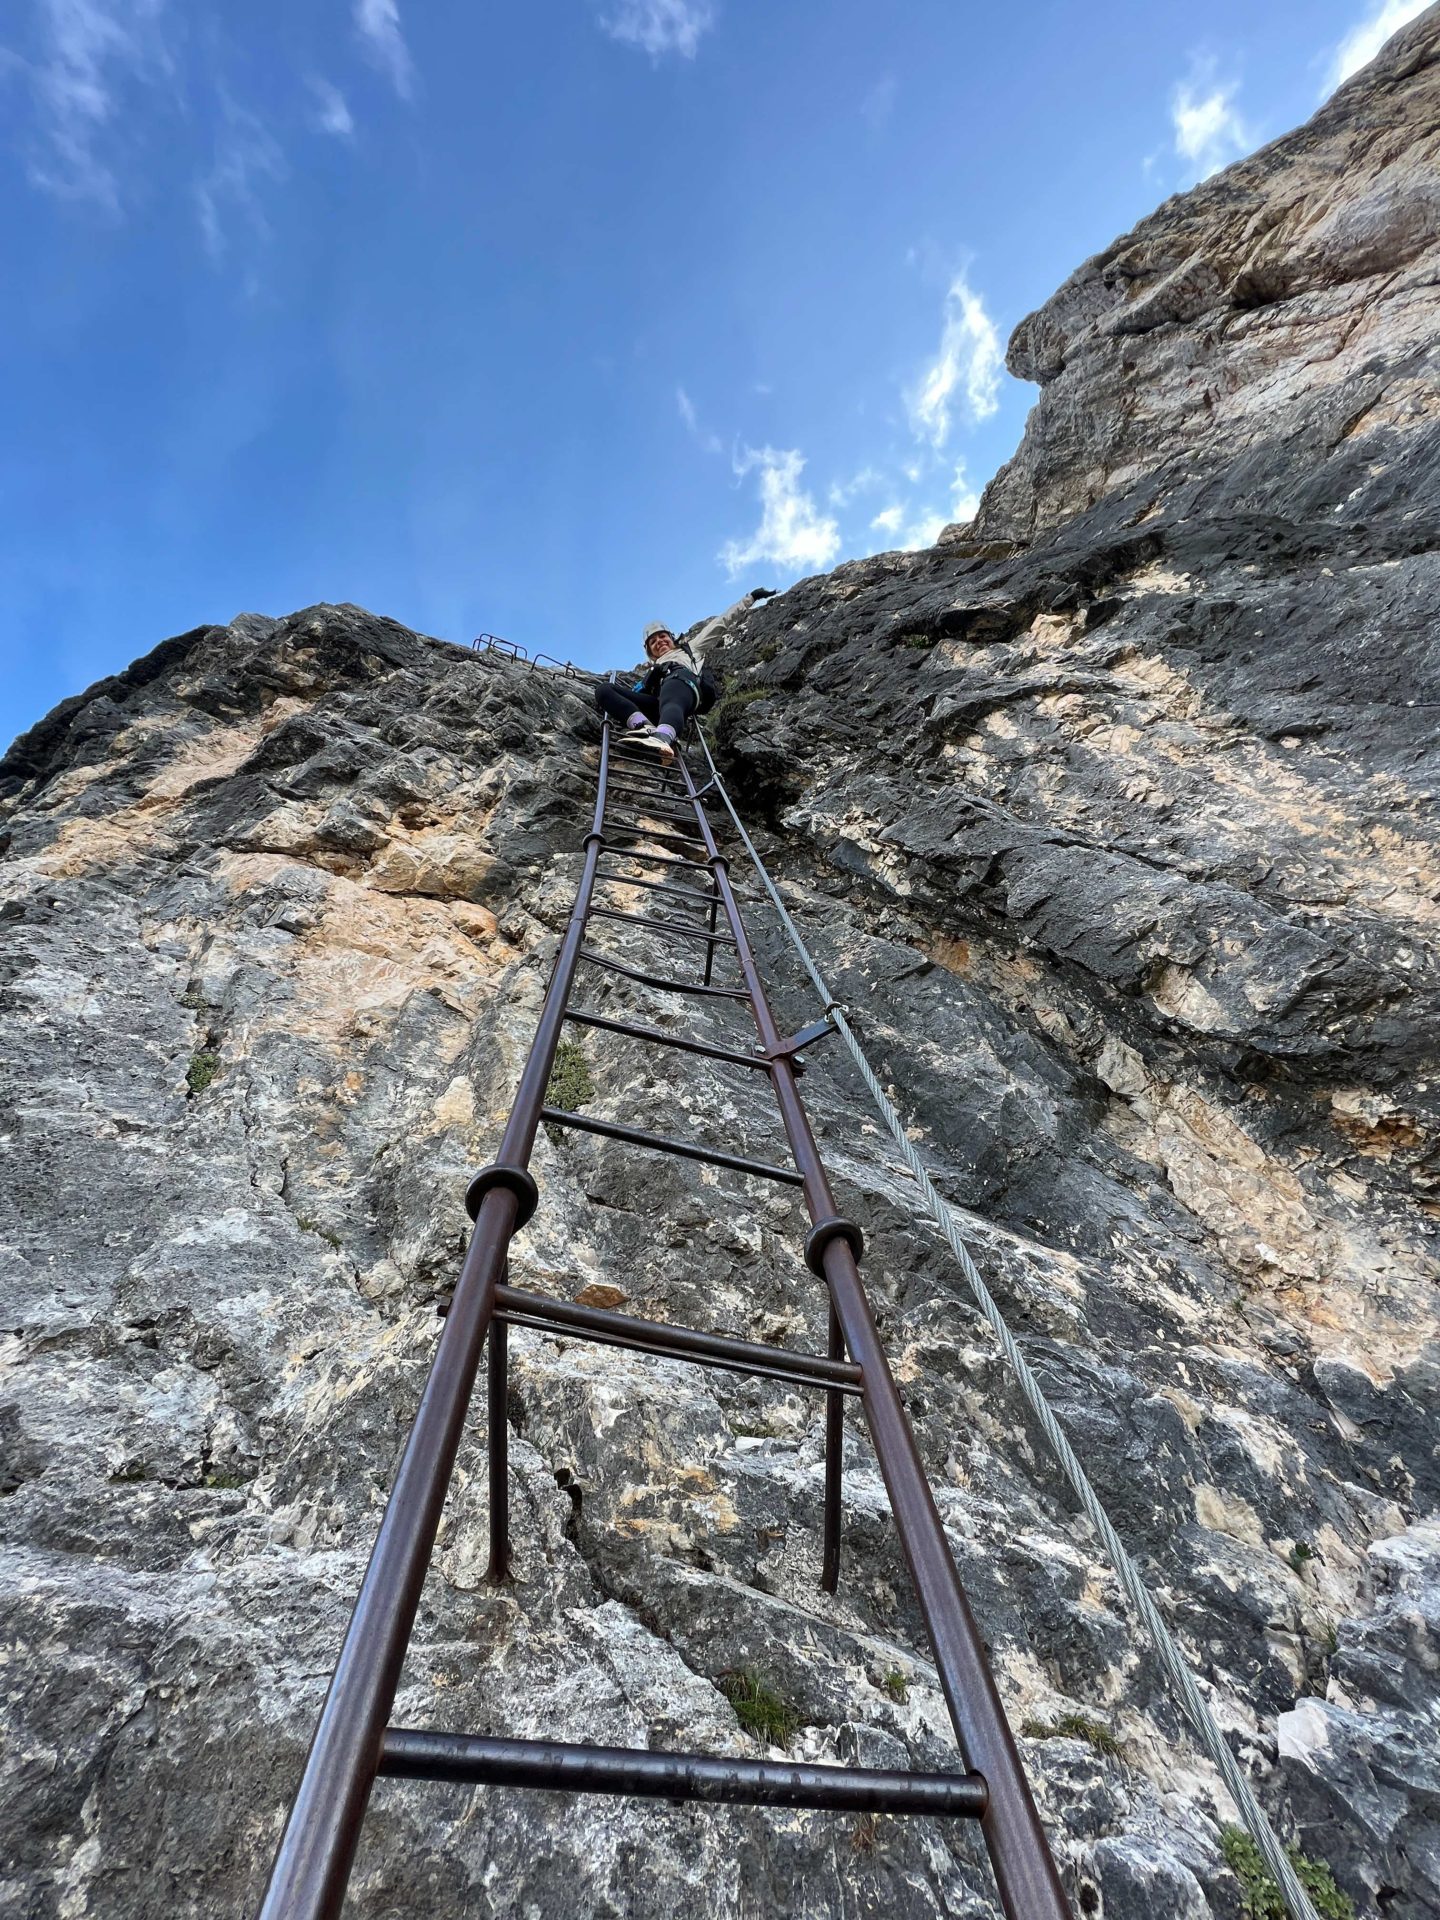 A via ferrata and ladder up a mountain in the Dolomites